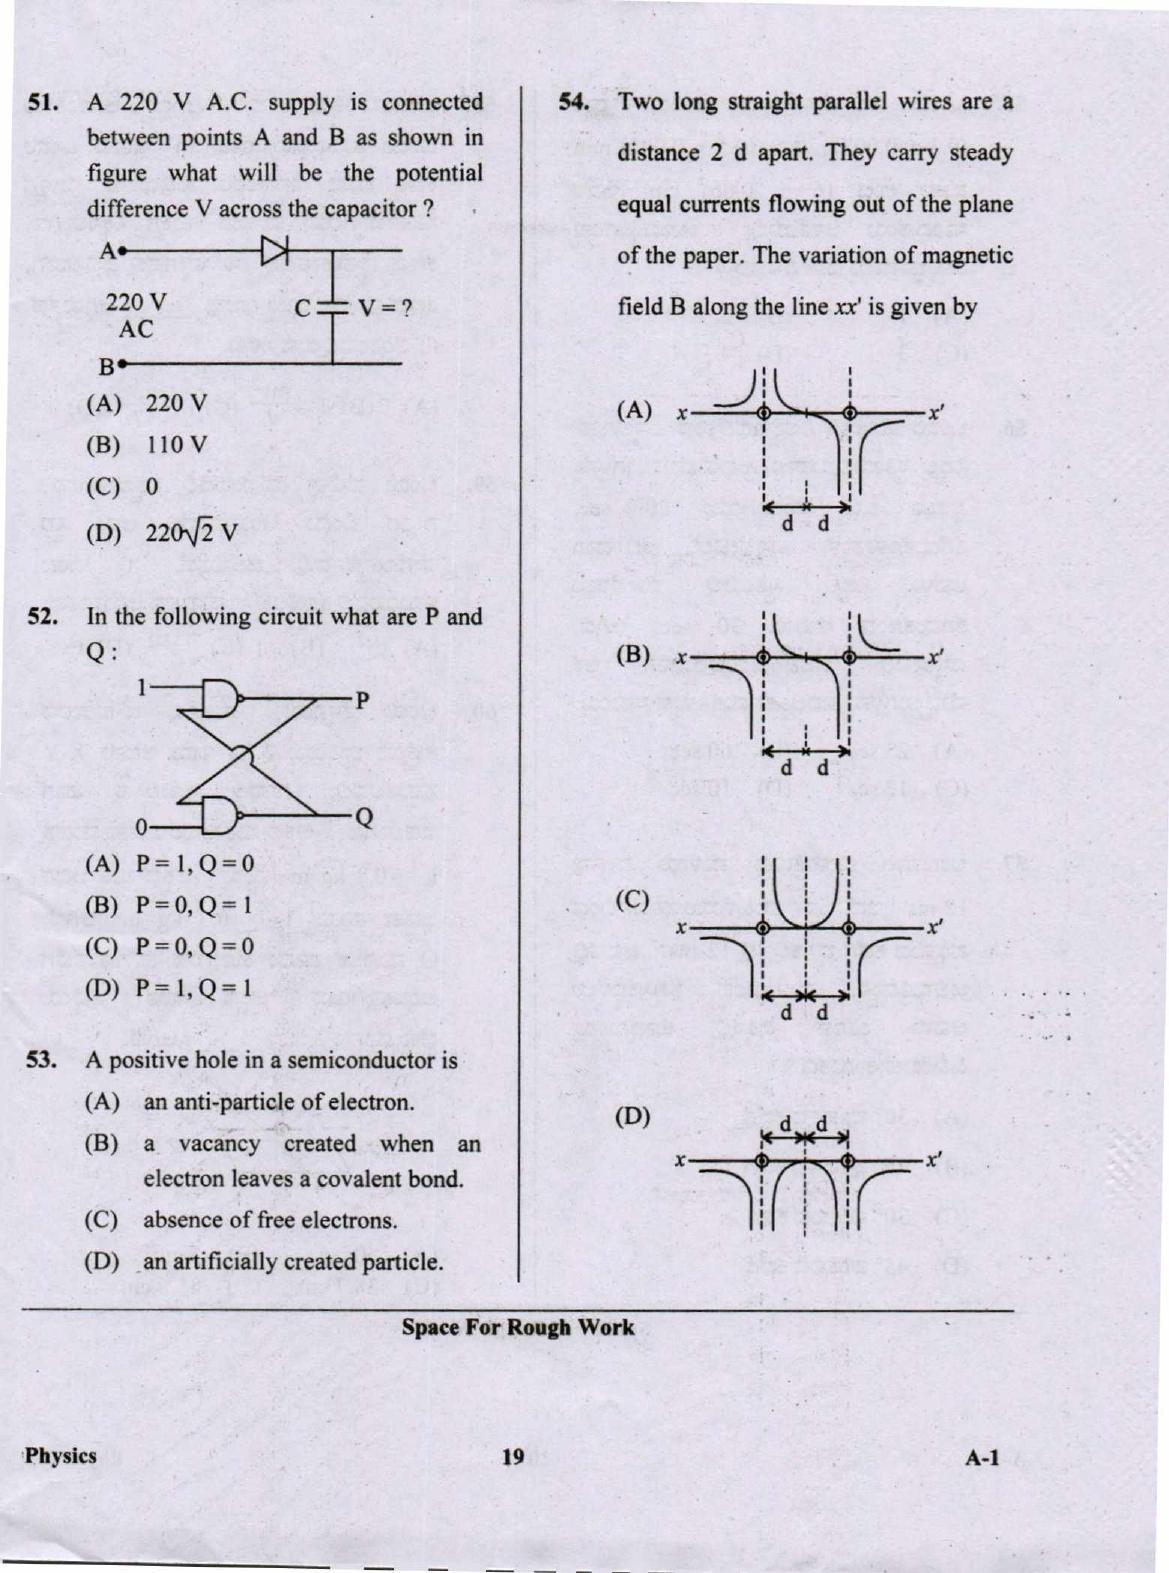 KCET Physics 2020 Question Papers - Page 19